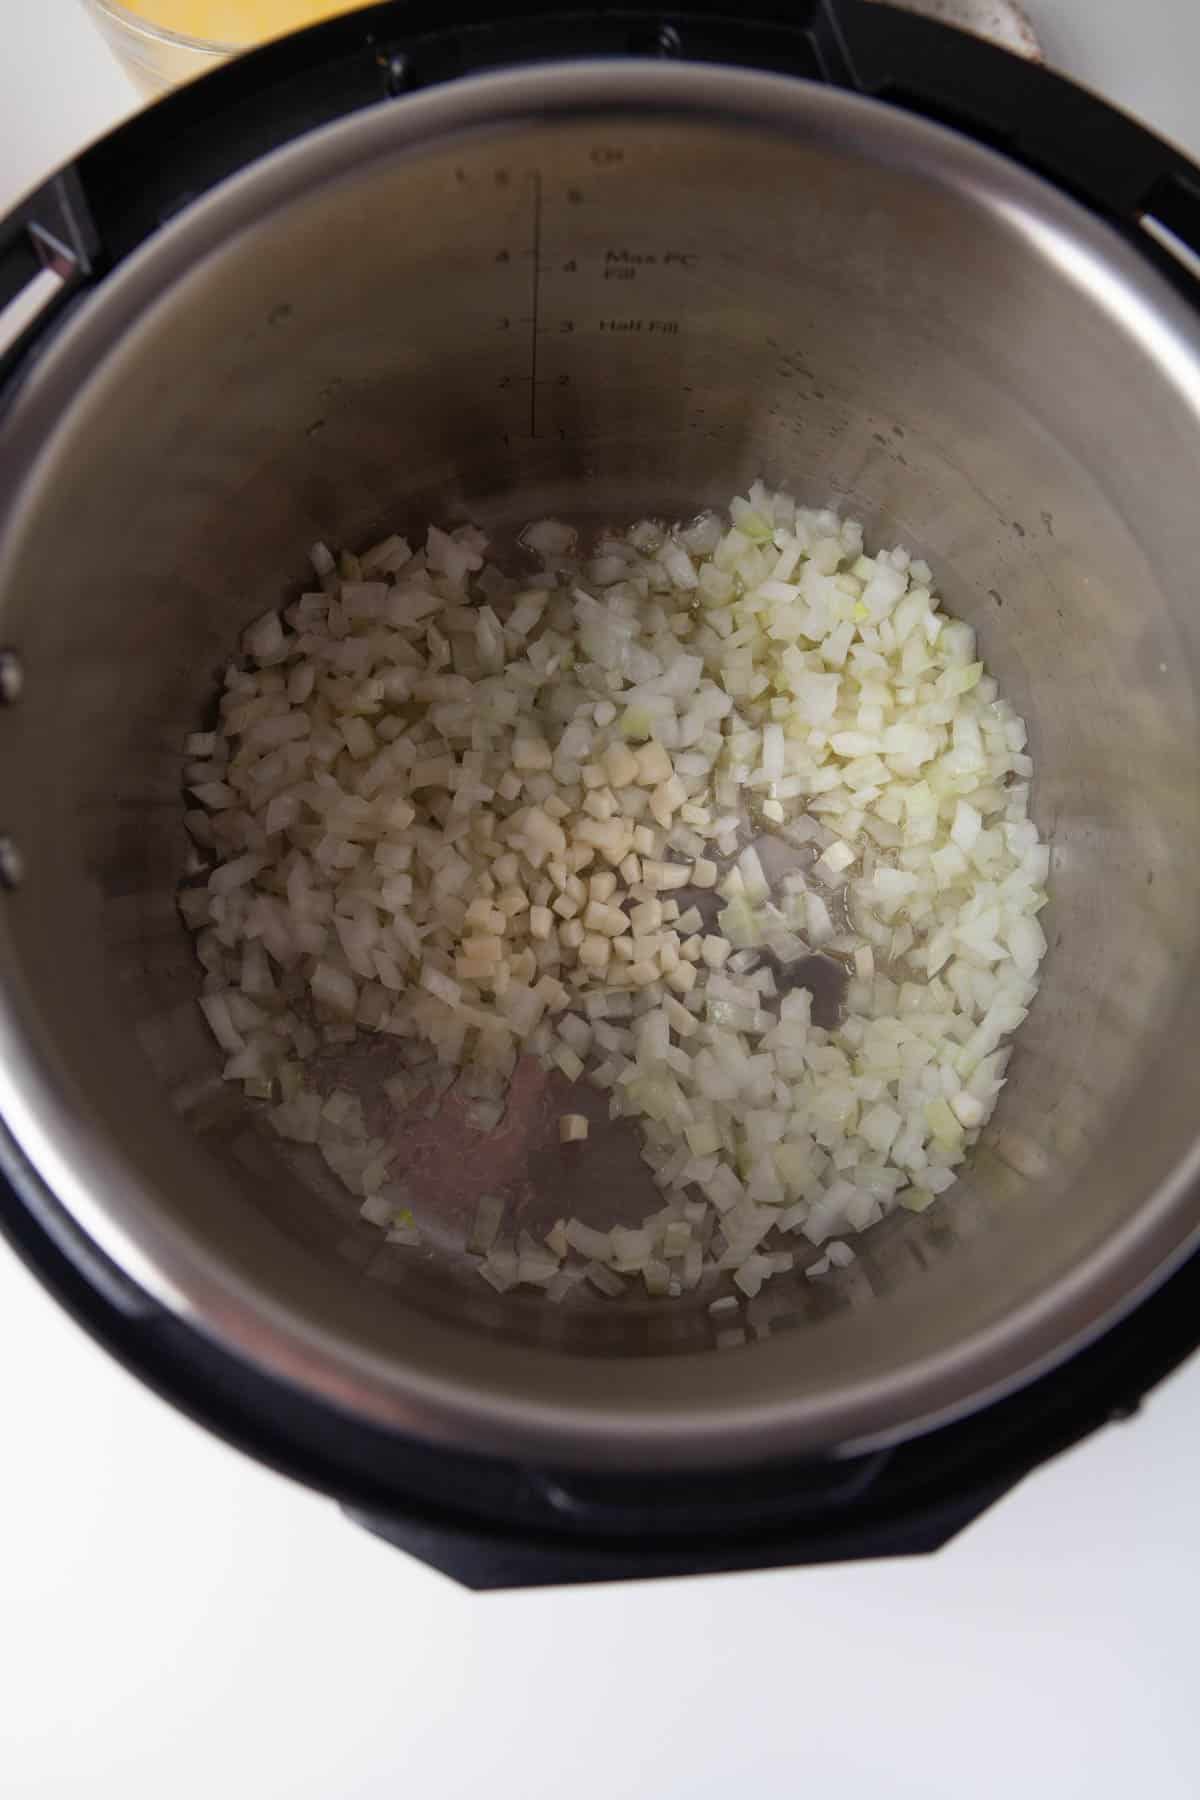 Sauteed onions and garlic in the Instant Pot.